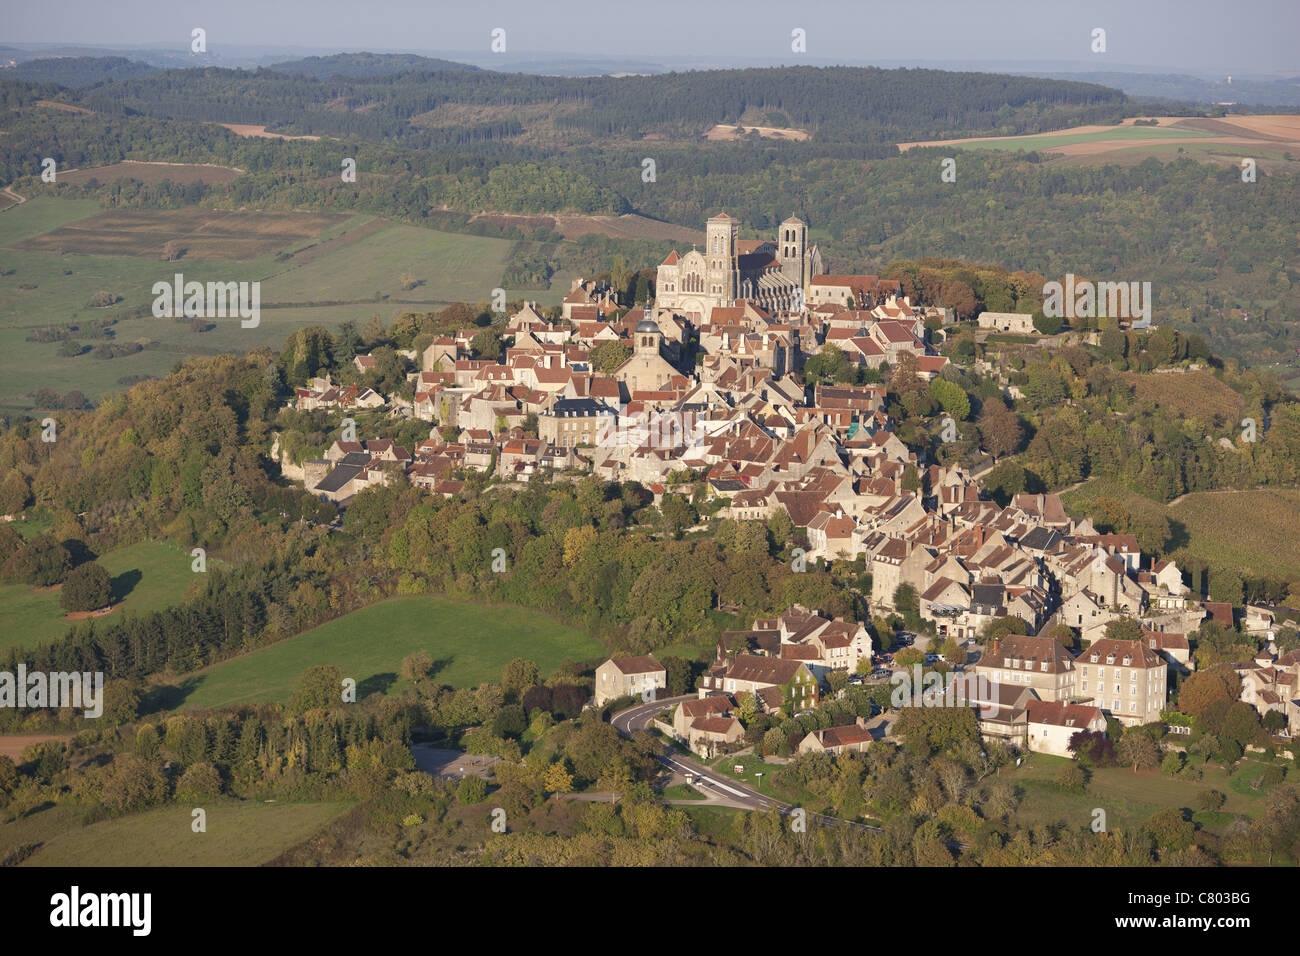 AERIAL VIEW. Small hill town in the countryside, St Mary Magdalene basilica at the top. Vezelay, Yonne, Bourgogne-Franche-Comté, France. Stock Photo